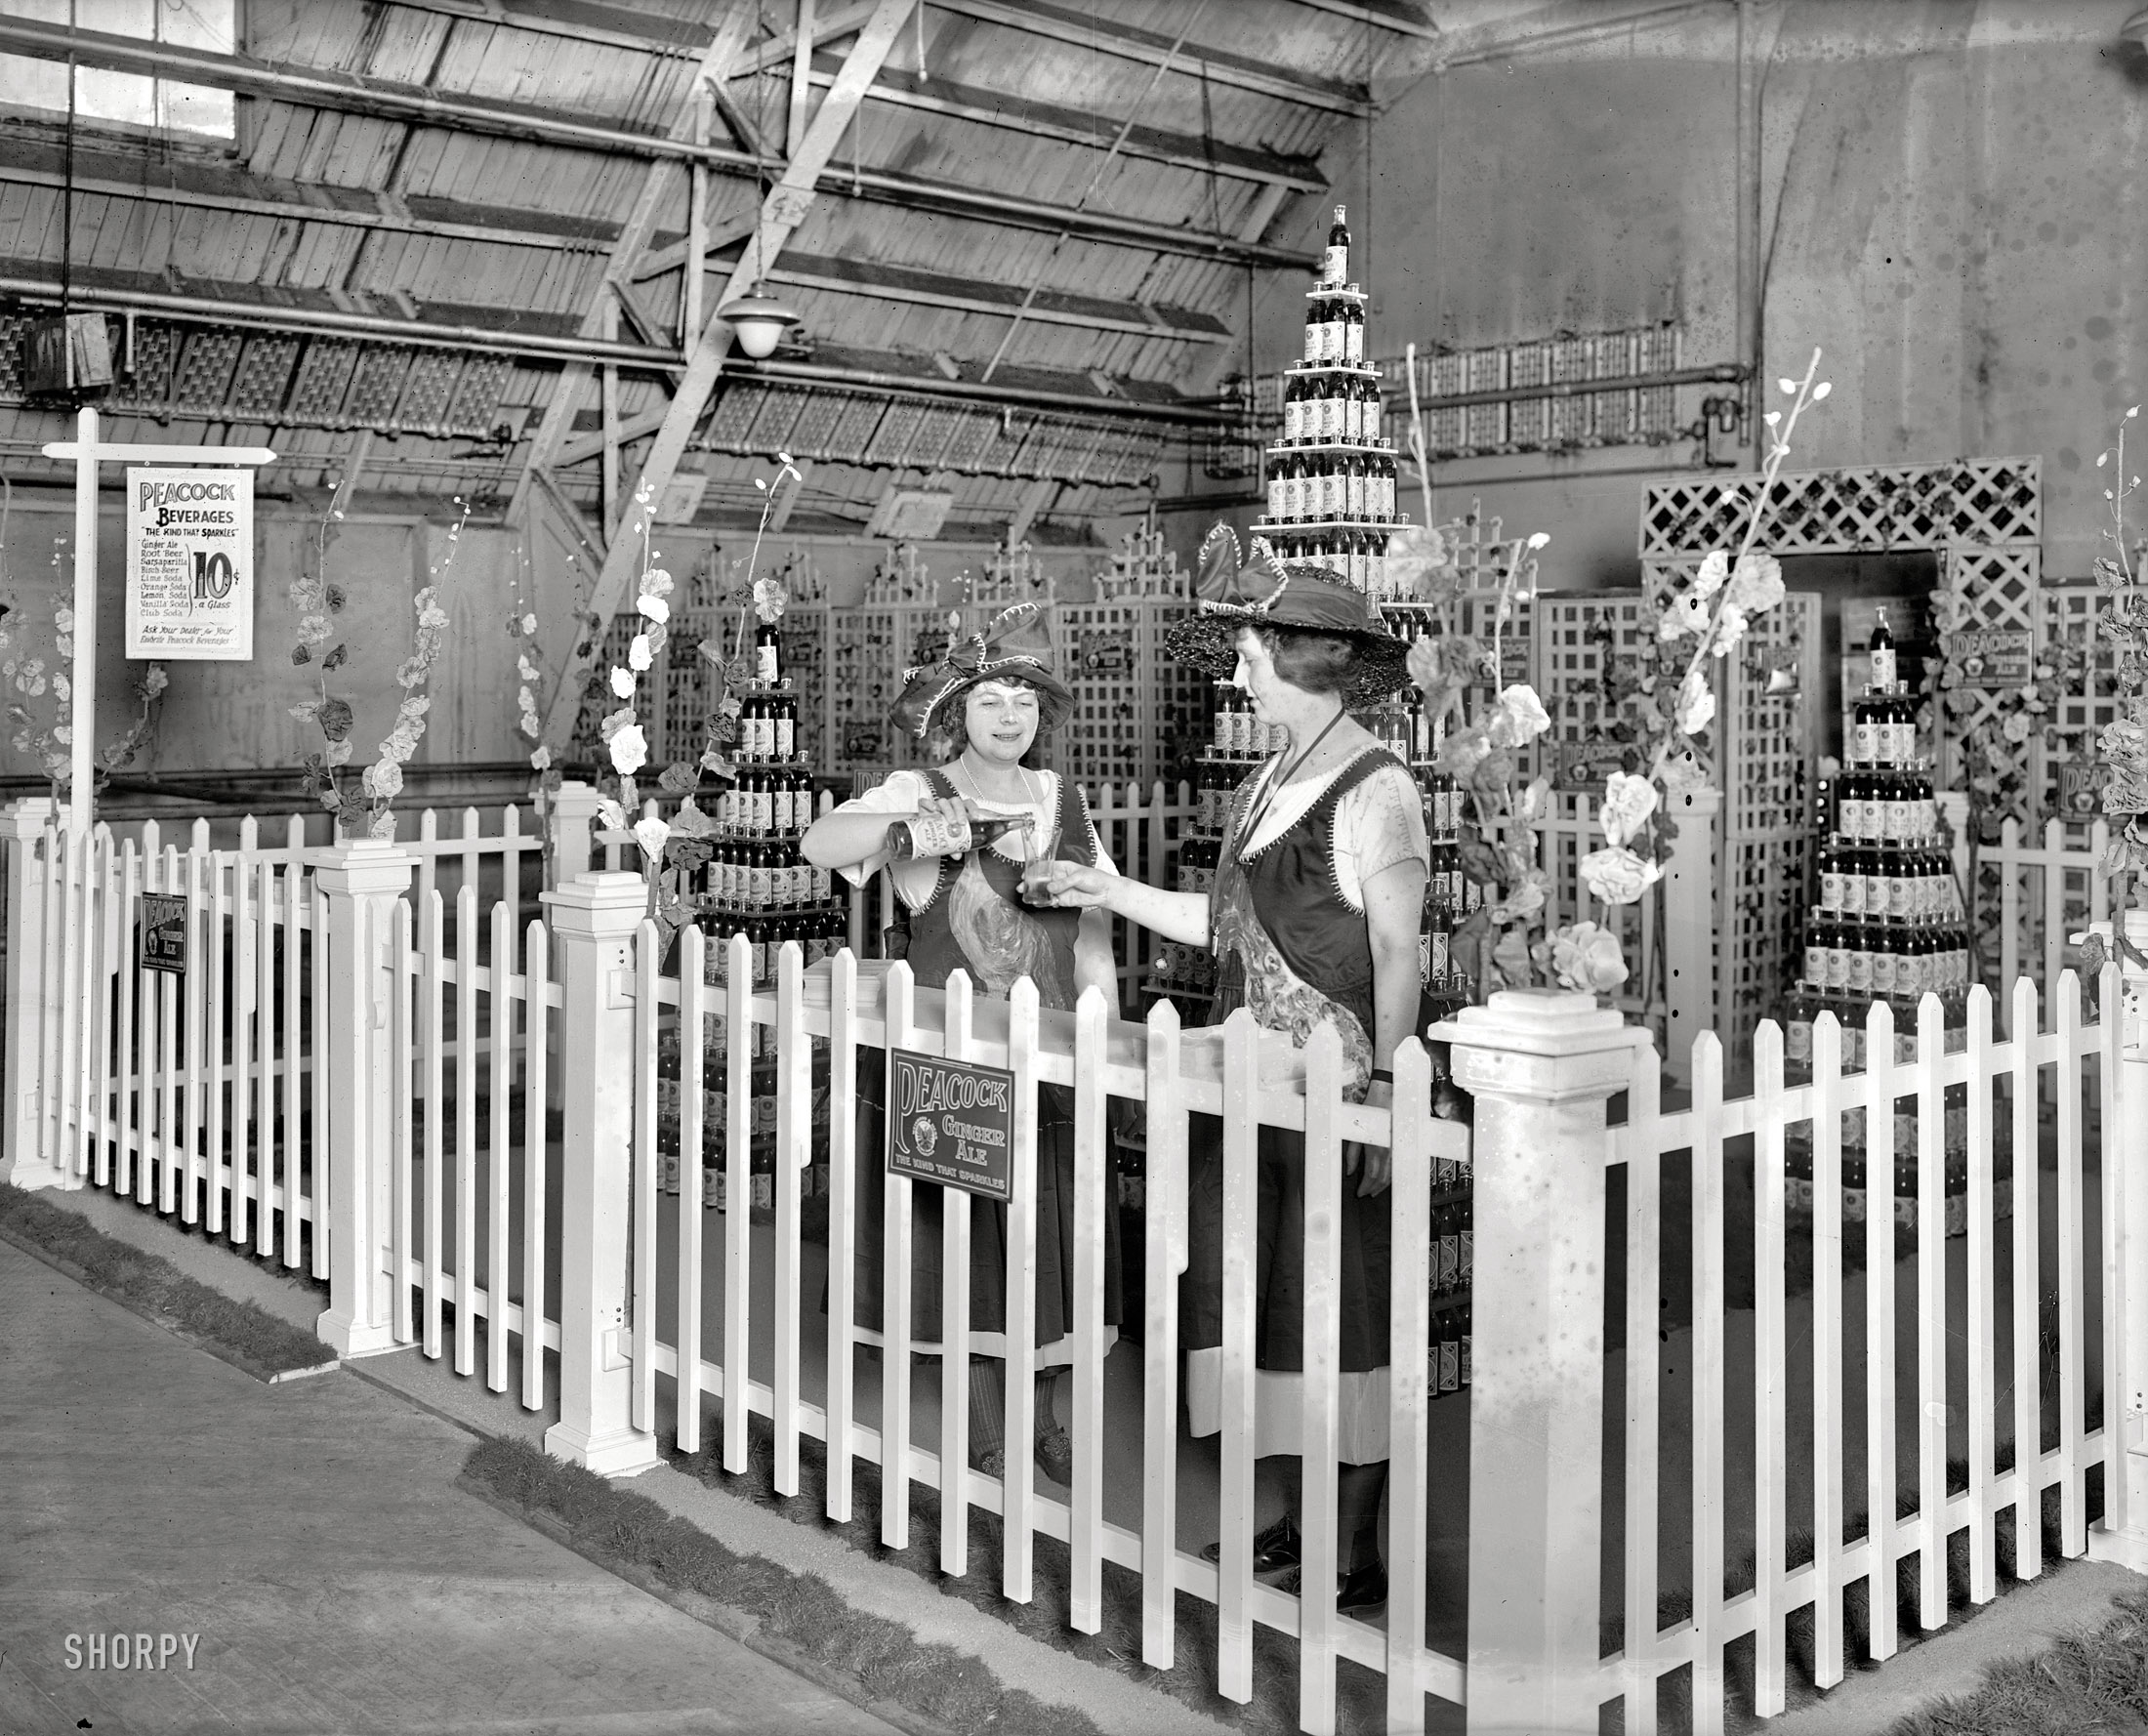 February 1922. Washington, D.C. "Food show -- Peacock exhibit -- Mrs. Julian E. Carabillo." Hollyhocks, peacocks and hens at the Retail Grocers Protective Association exposition at Washington Convention Hall. View full size.